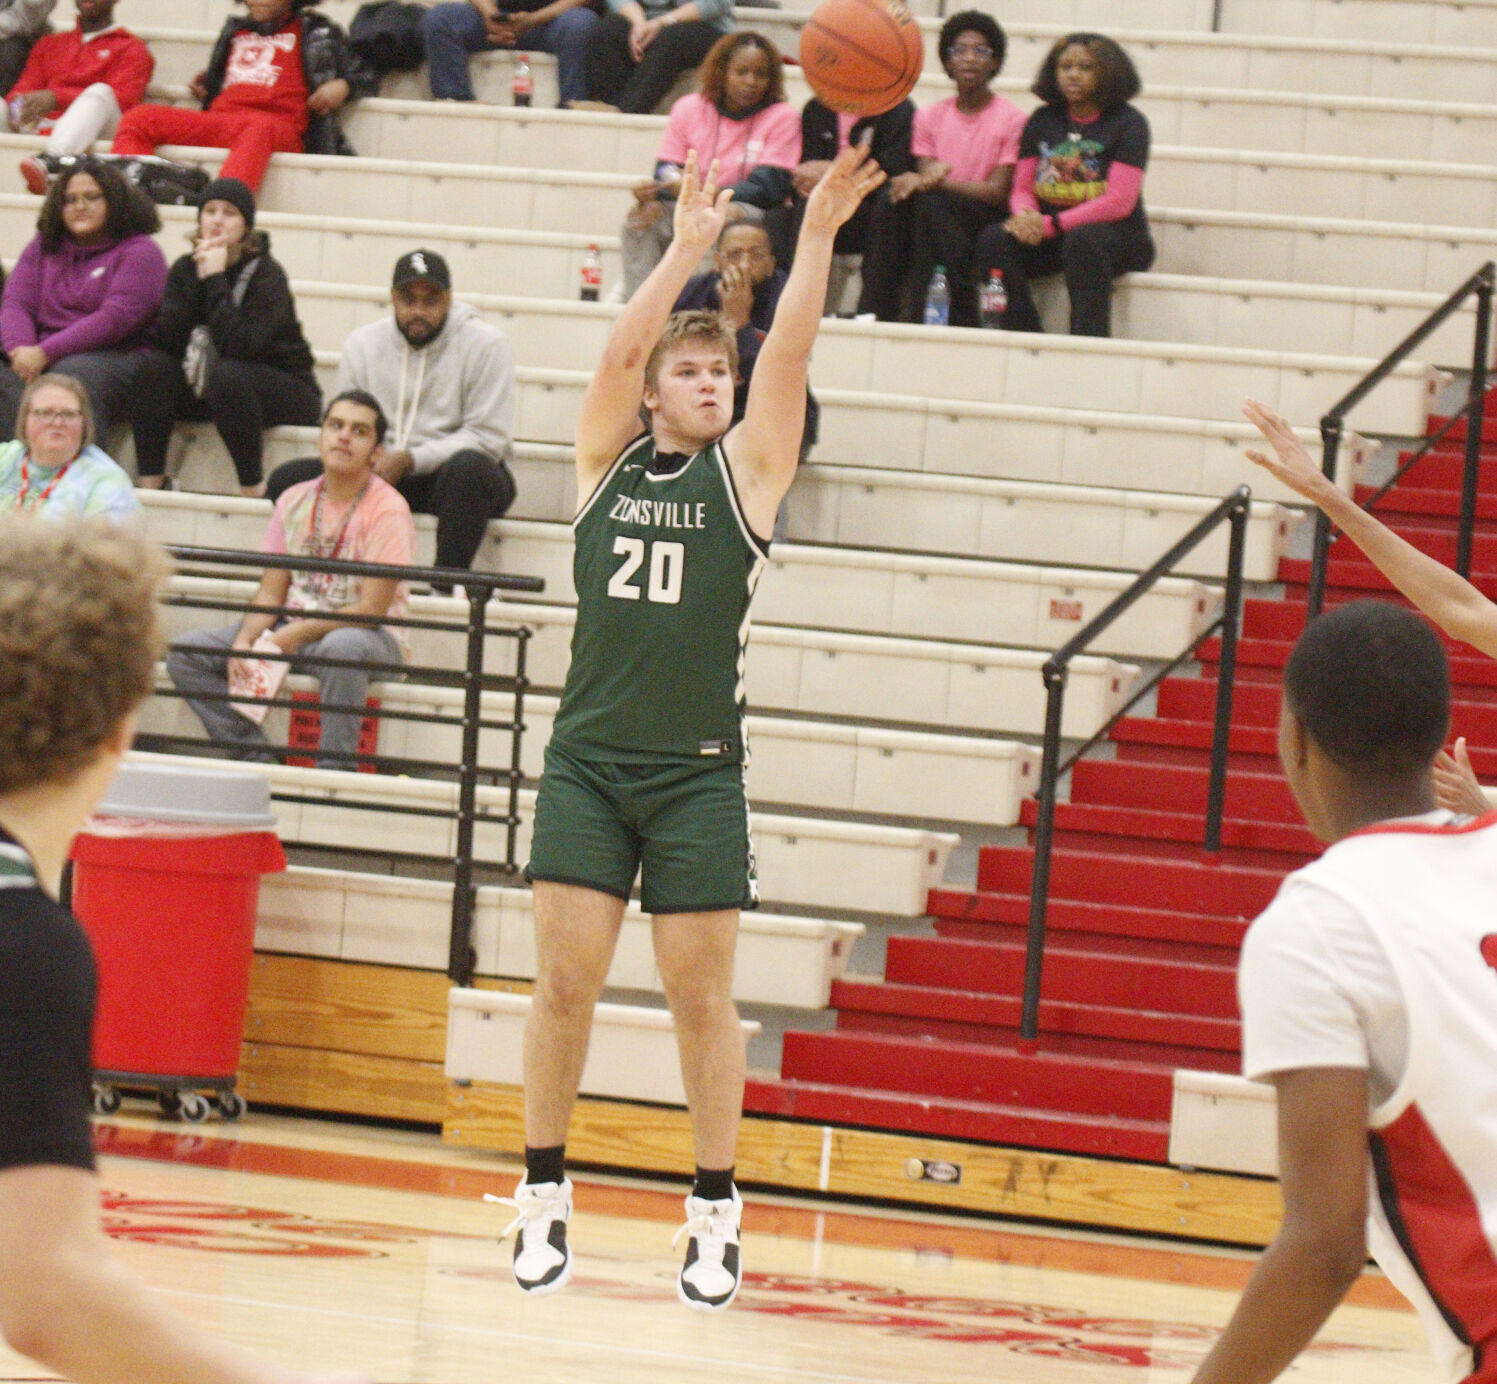 Zionsville Boys Basketball Team Victorious Over Pike with Remarkable Finish